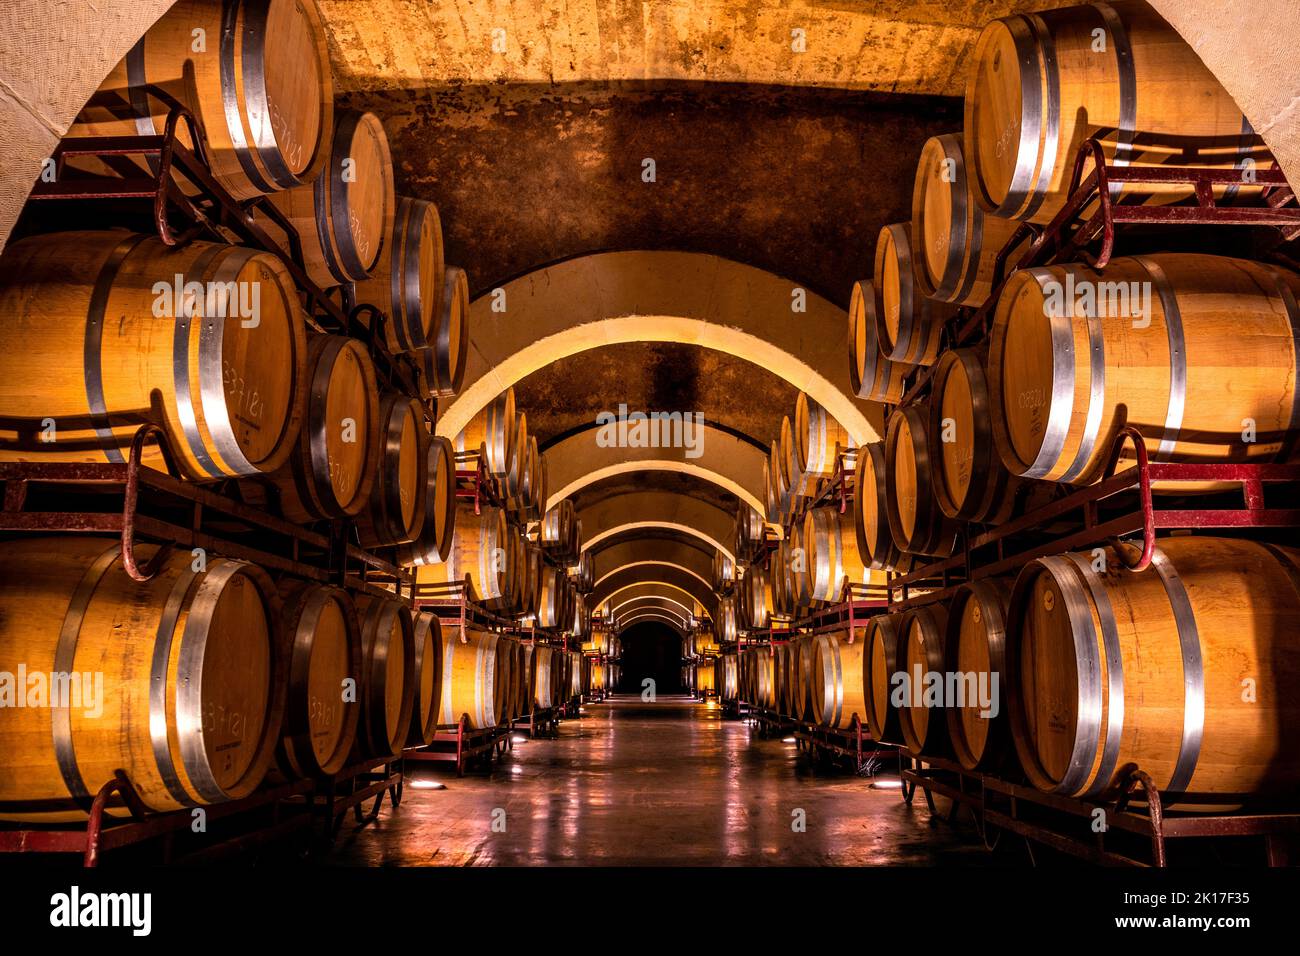 Cellar of a wine cellar with macerating wine barrels. Stock Photo